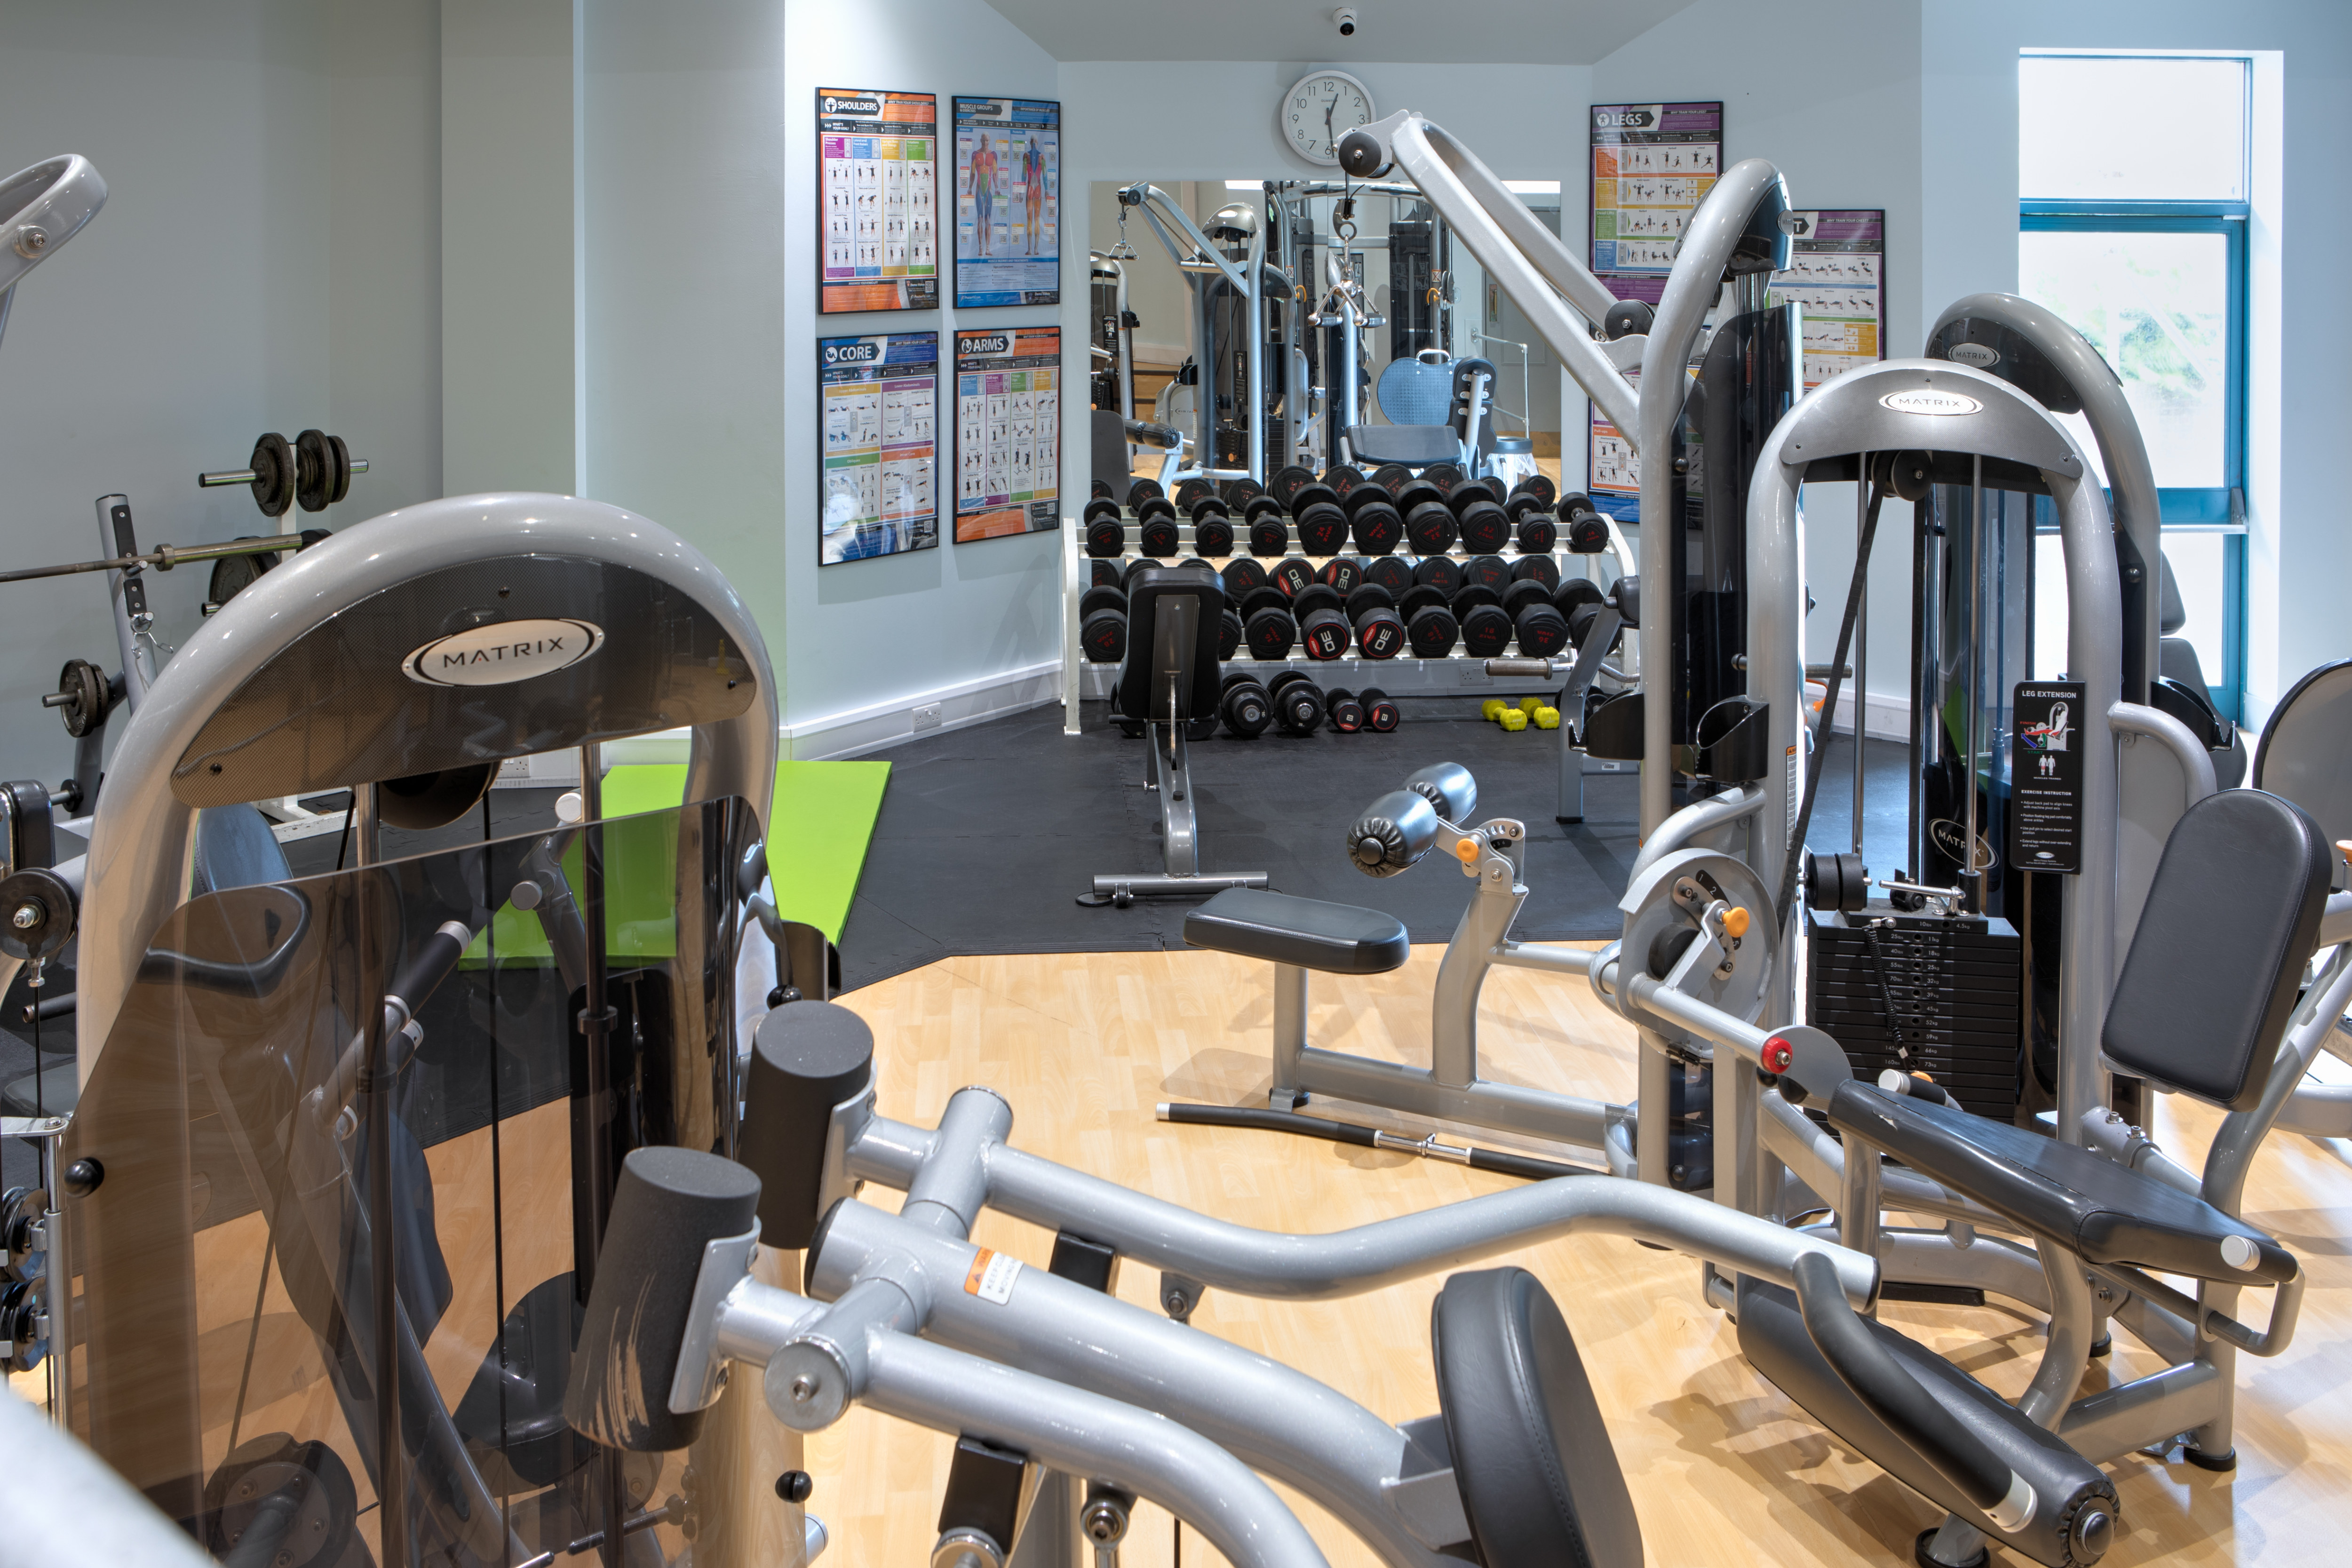 Weights and Other Equipment in Fitness Center